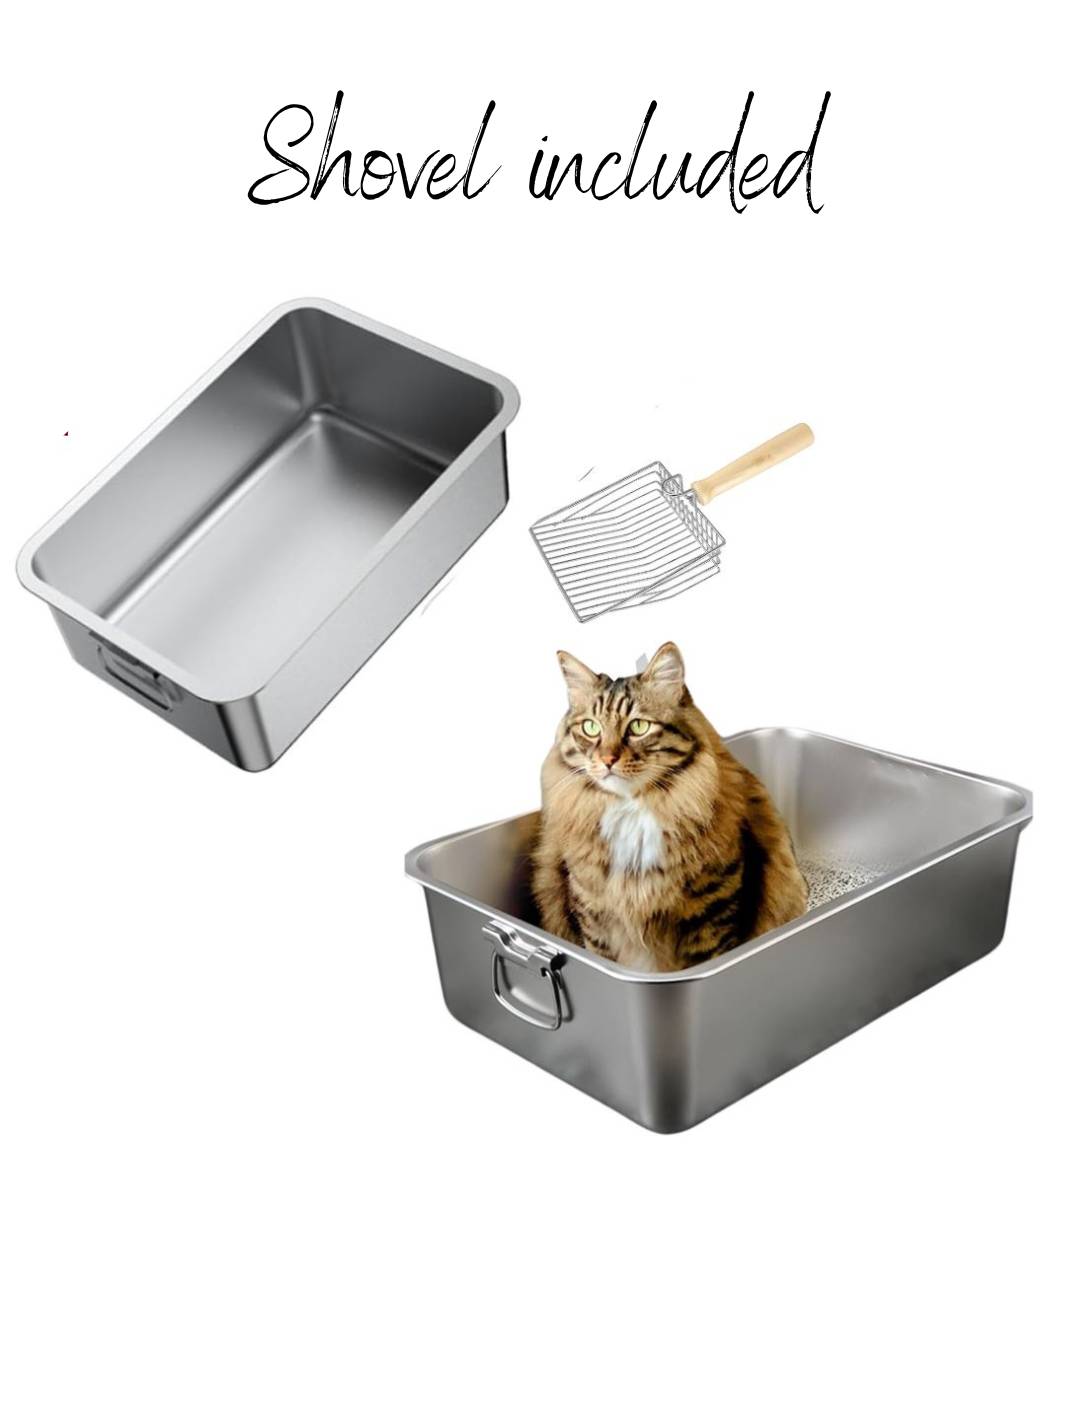 Jumbo Stainless Steel Cat Litter Tray for Large Cats